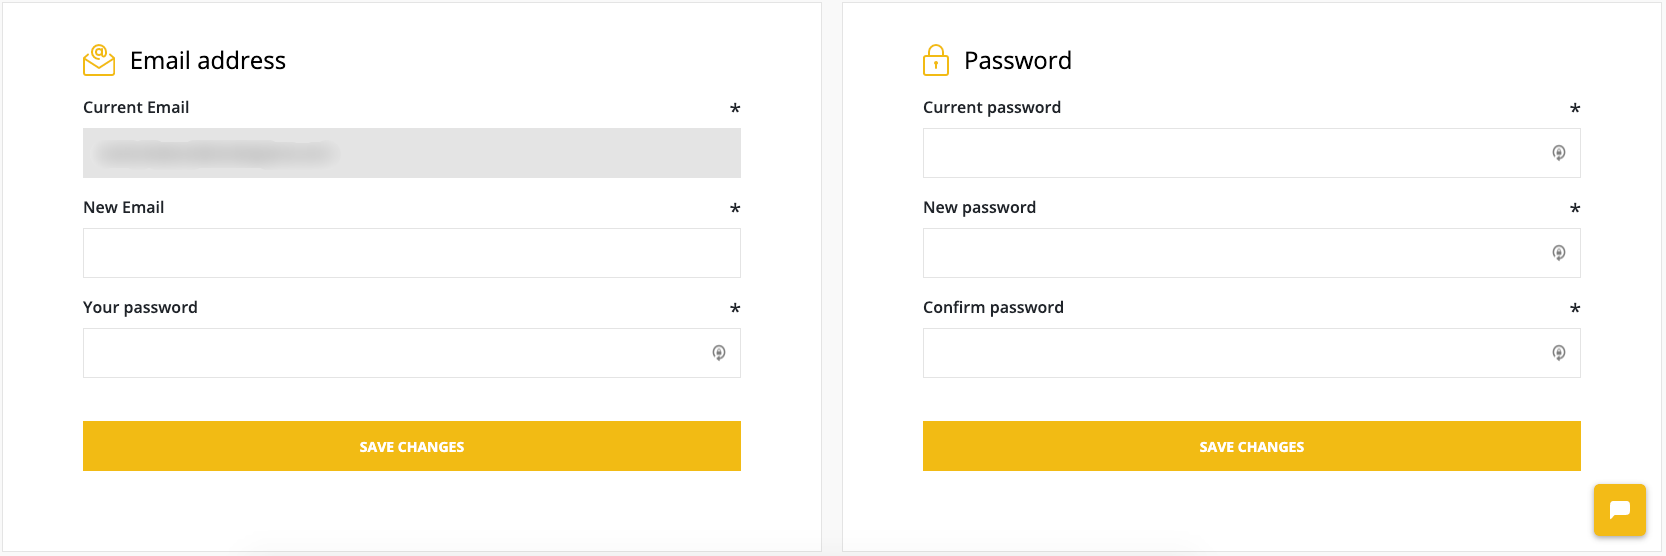 Email address window shown on the left with current email, new email, and your password fields displayed. password window on the right with current password, new password, and confirm password fields displayed. 